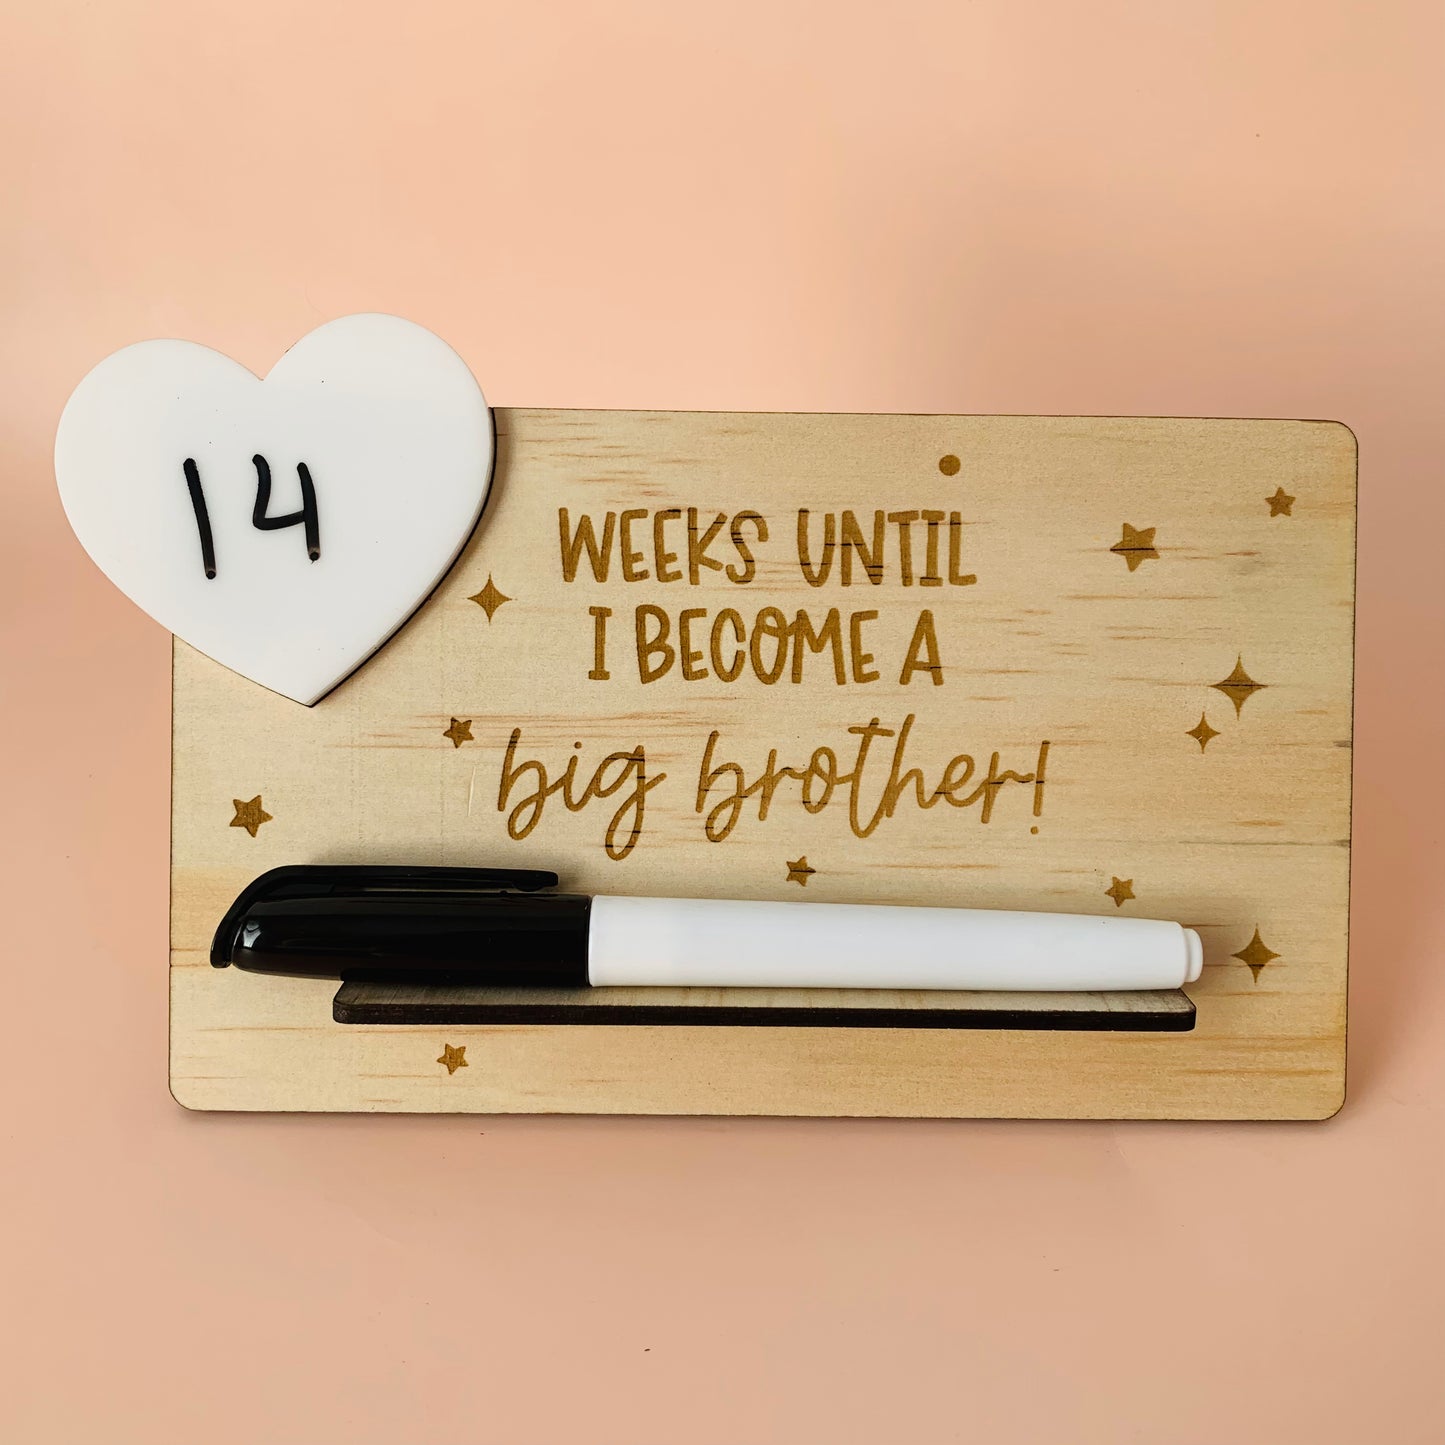 Weeks Until I Become a Big Brother Wooden Countdown